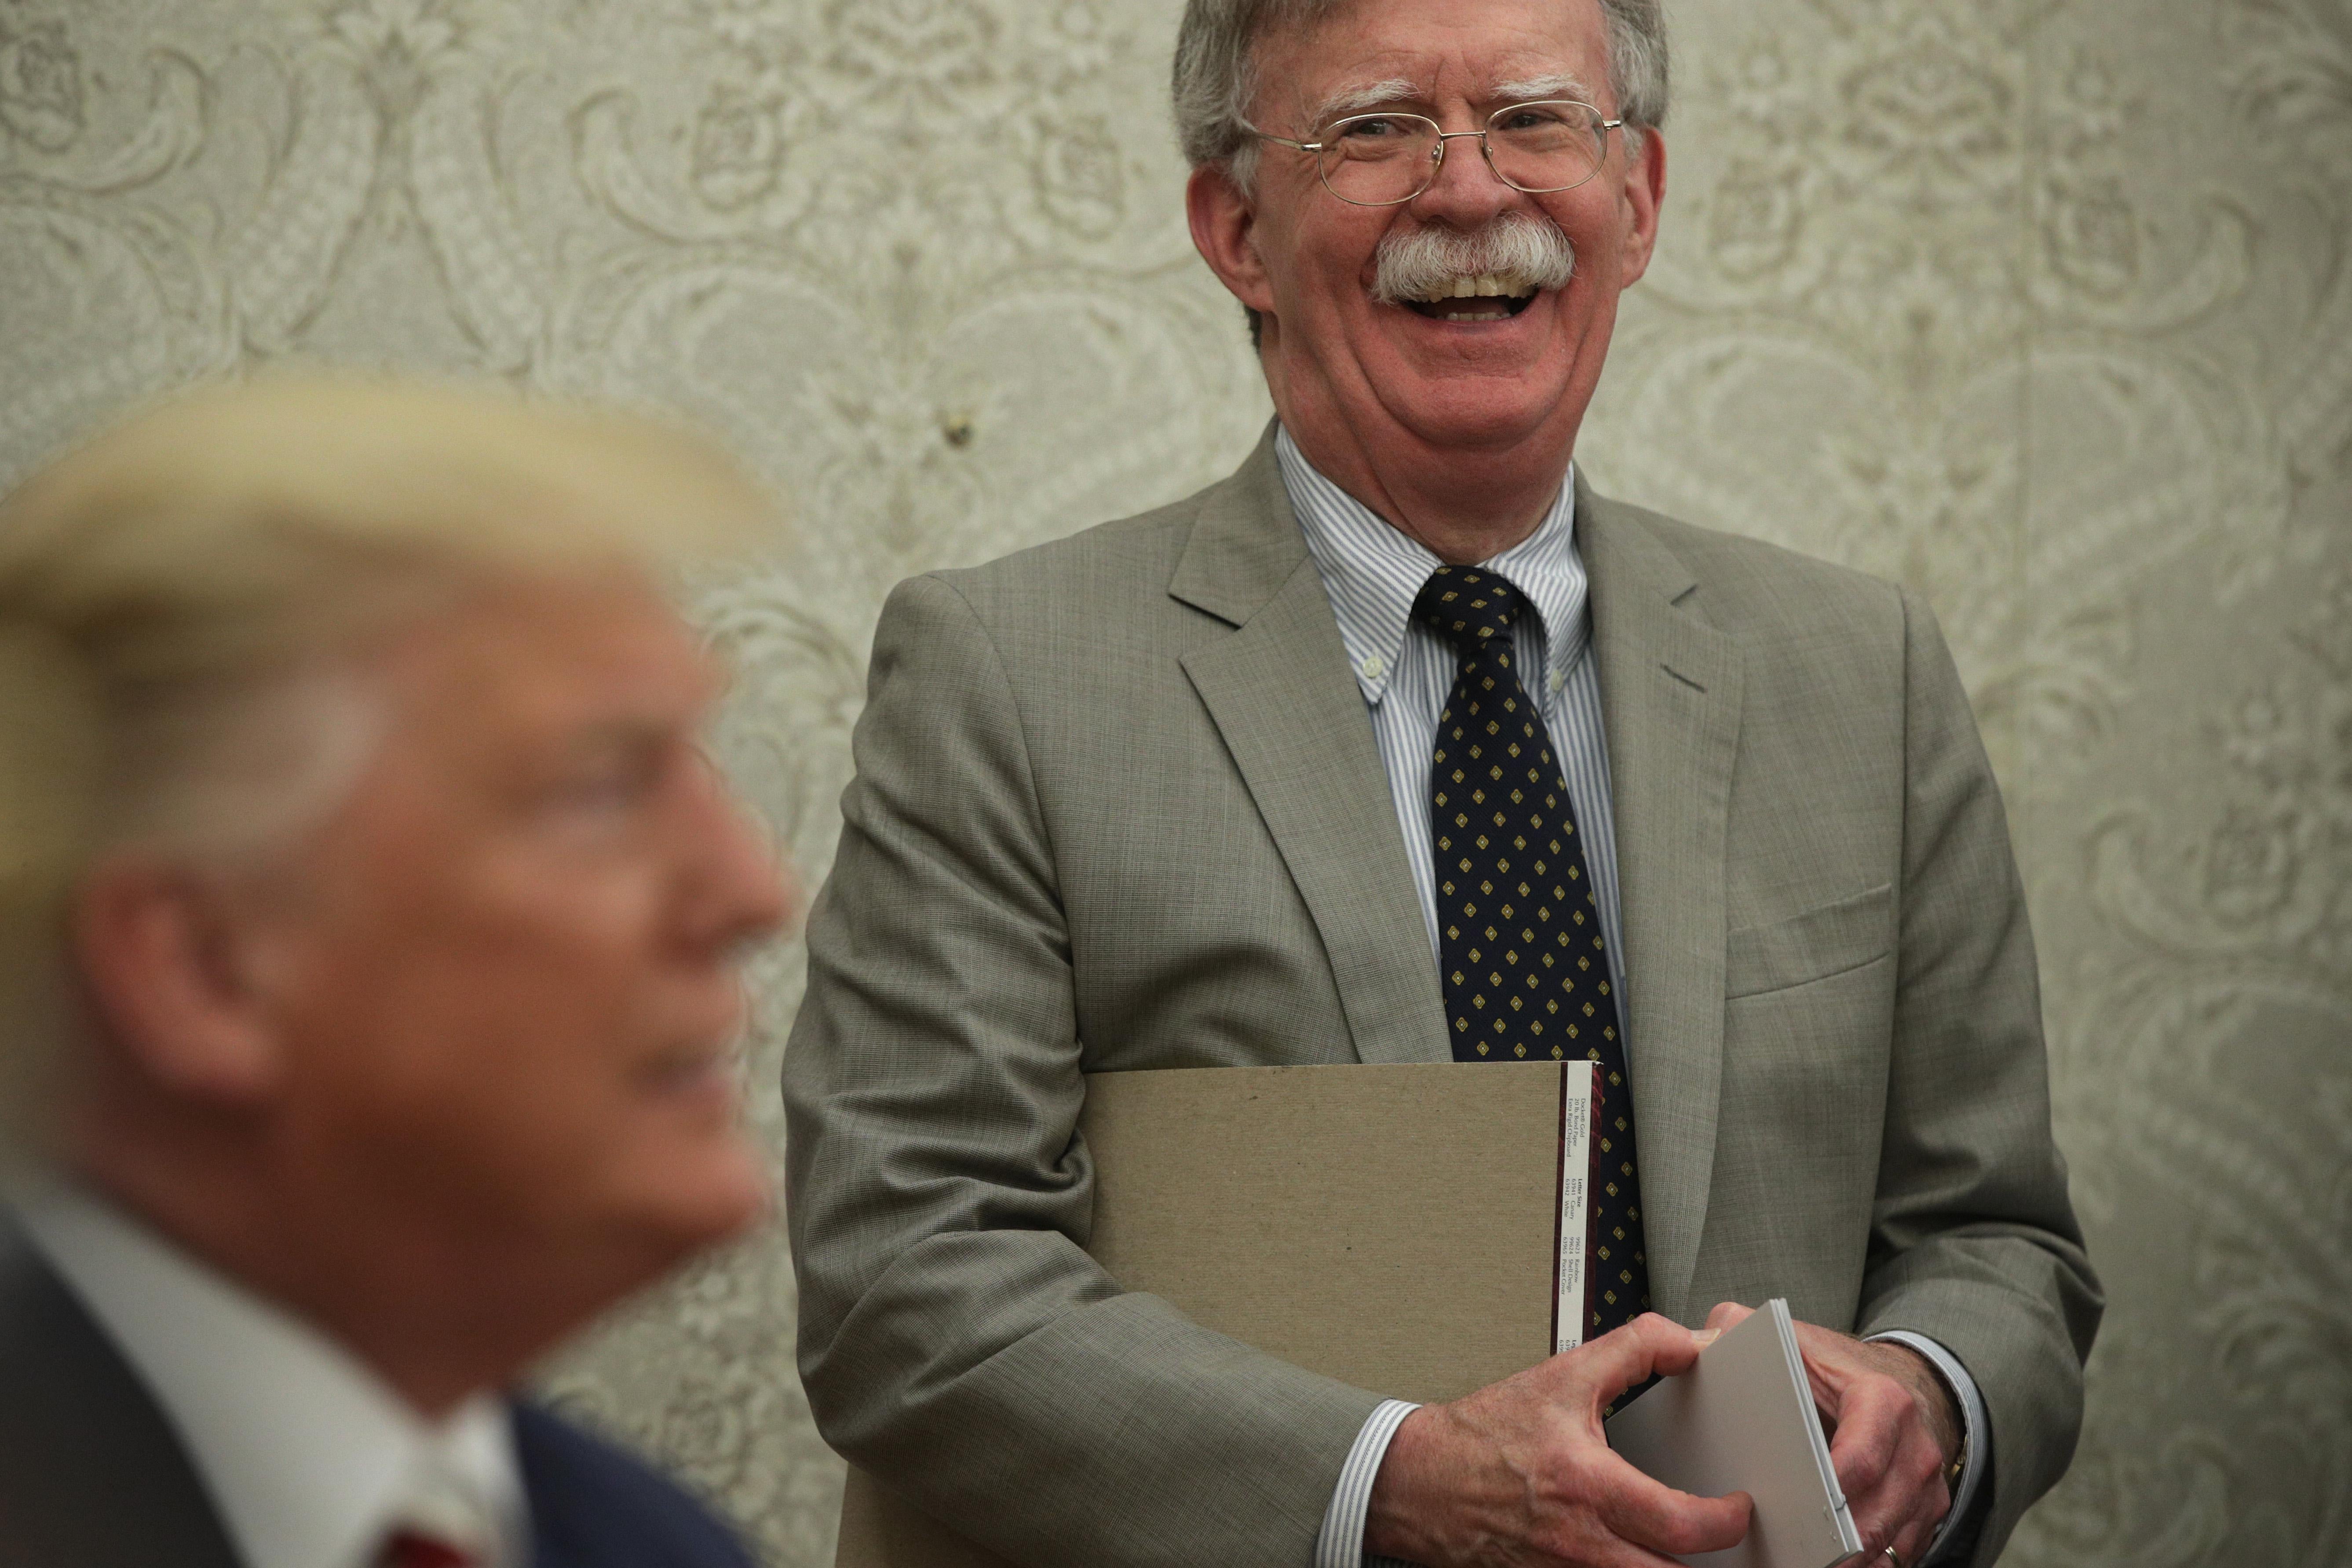 President Donald Trump speaks to members of the media as John Bolton listens at the Oval Office of the White House on August 20, 2019 in Washington, D.C. 